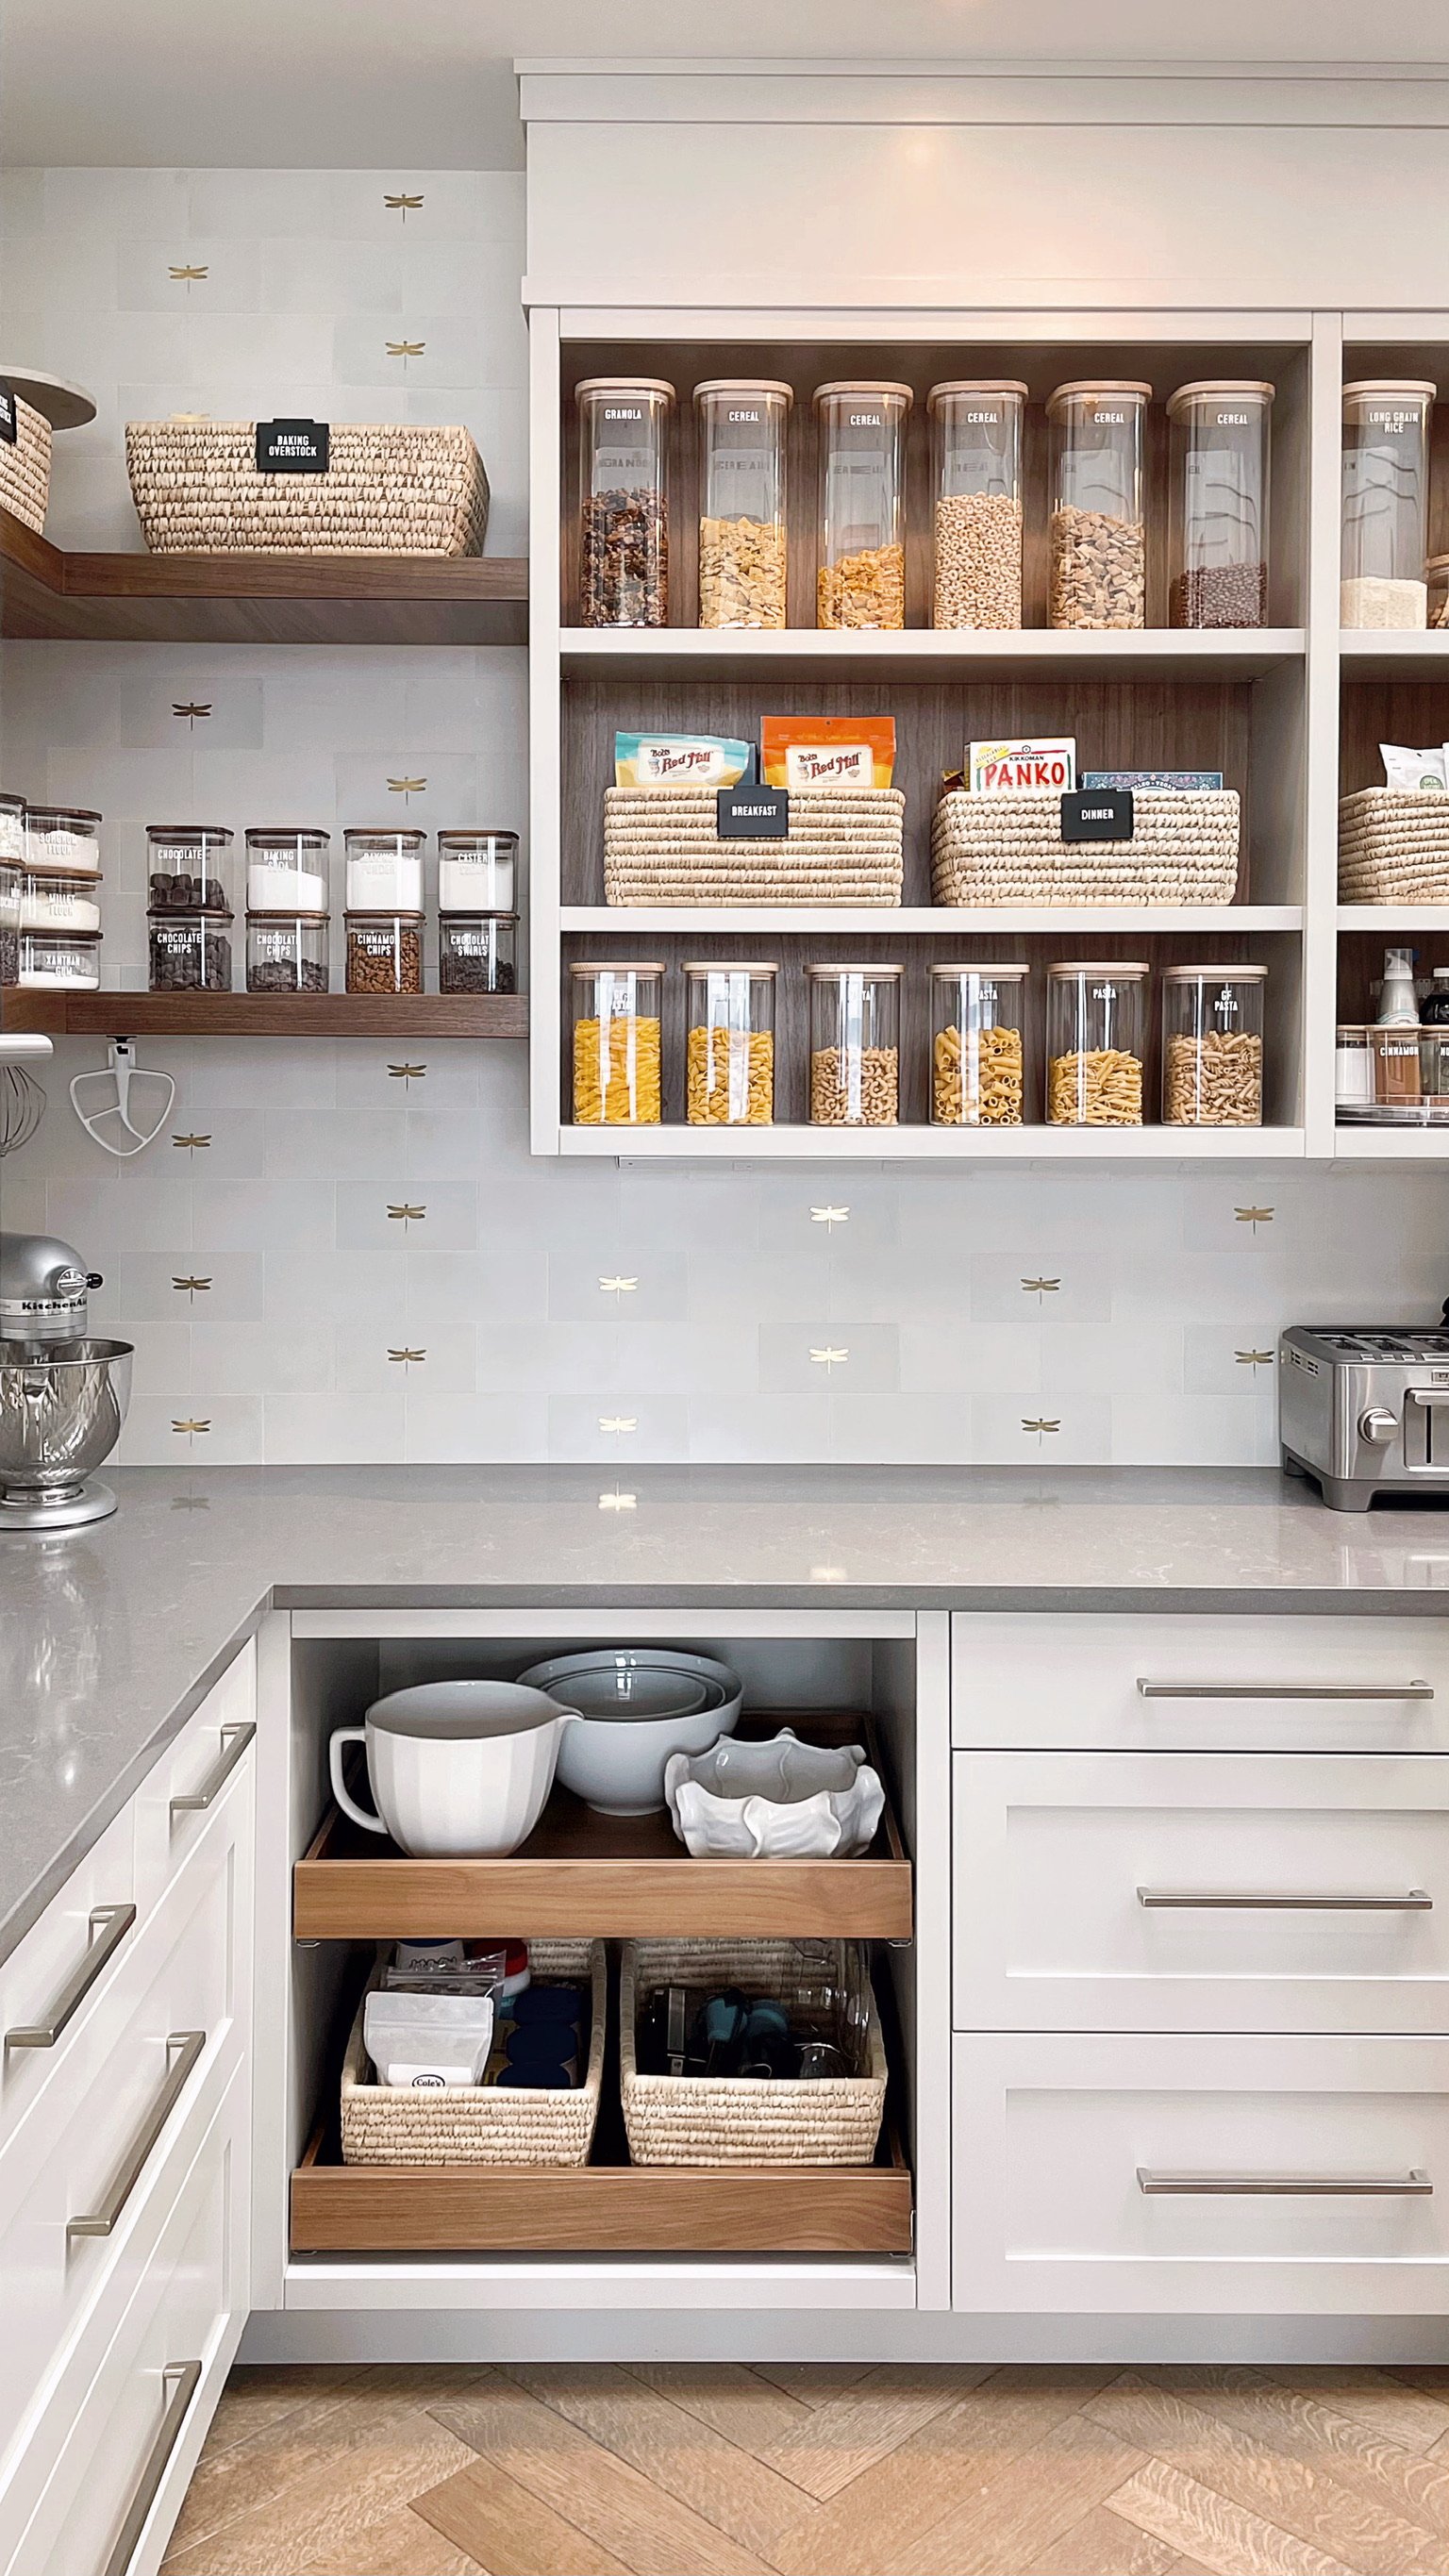 9 Steps to Simple Pantry Organization That Works